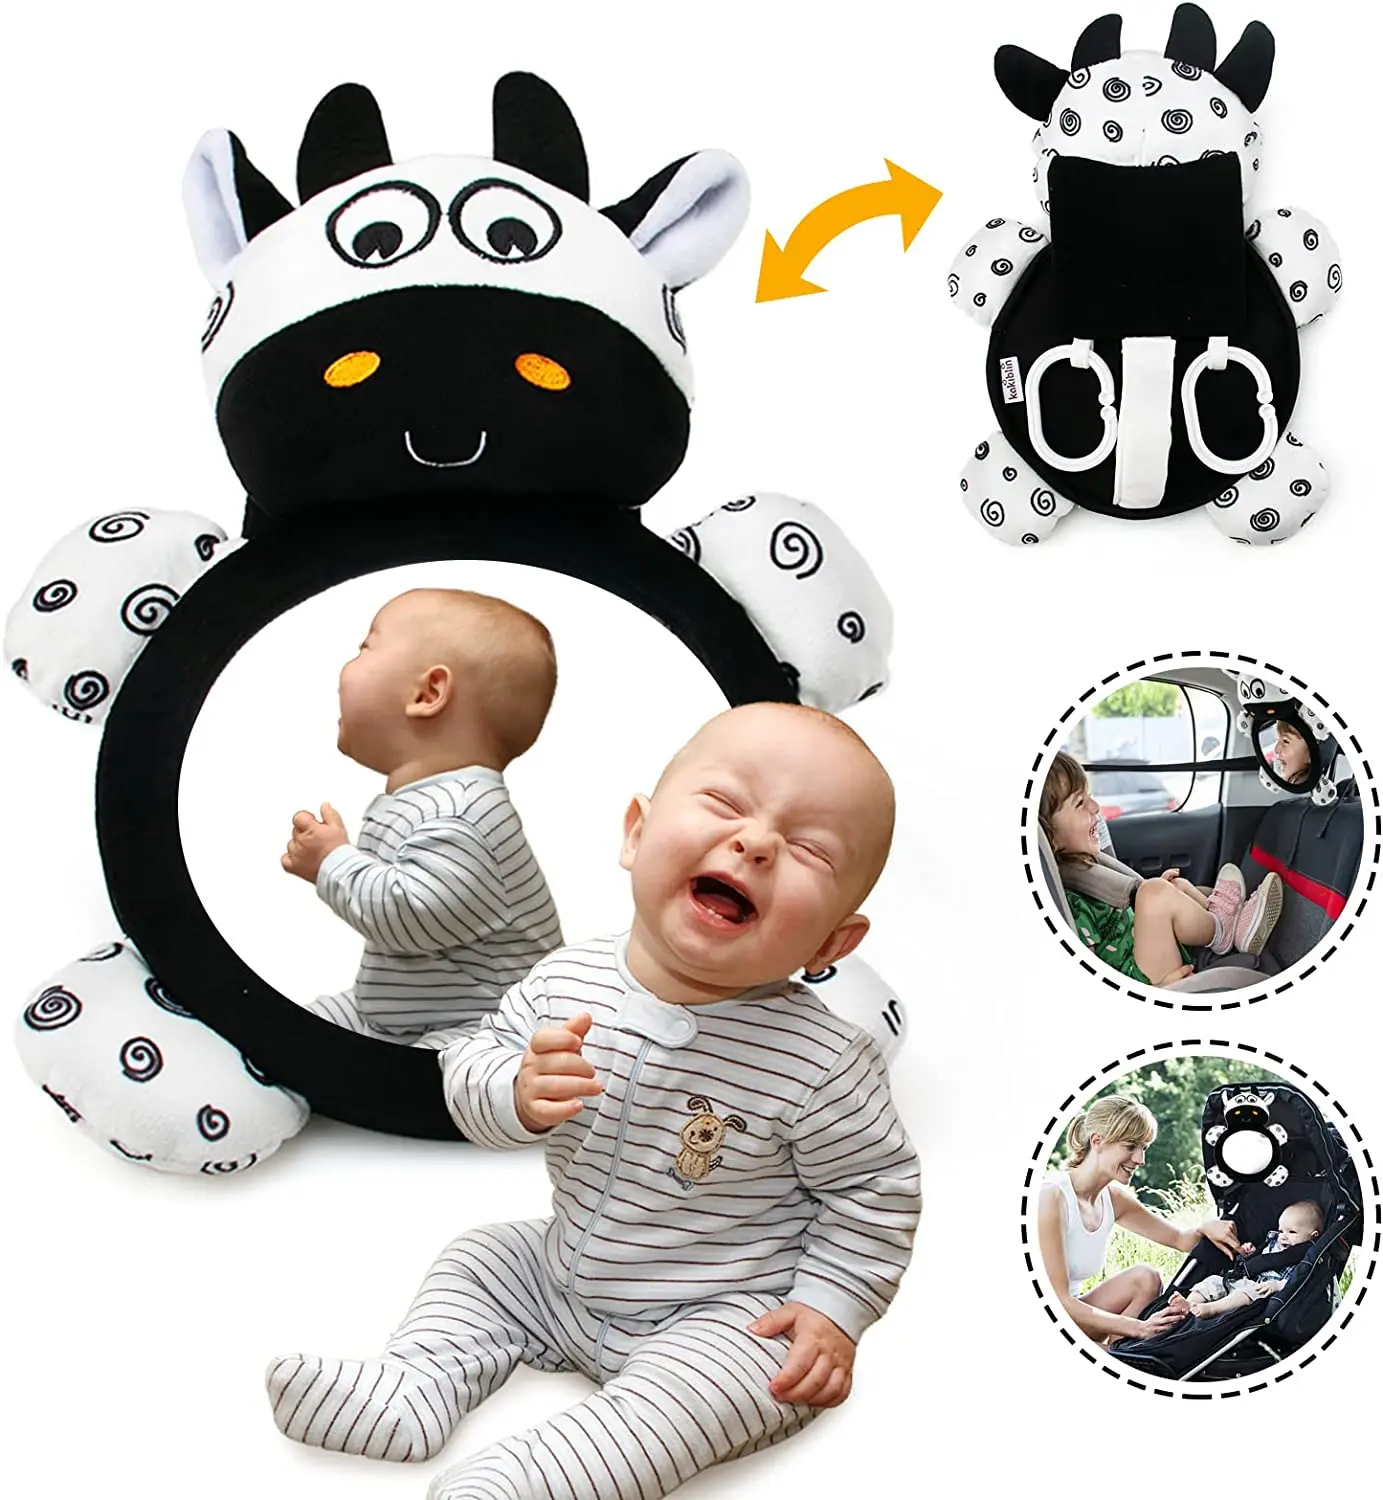 For Infant 0+ Months Baby Rear Mirror Hanging Squeaky Sensory Soft Rattle Baby Toys Activity Center For Play Kick